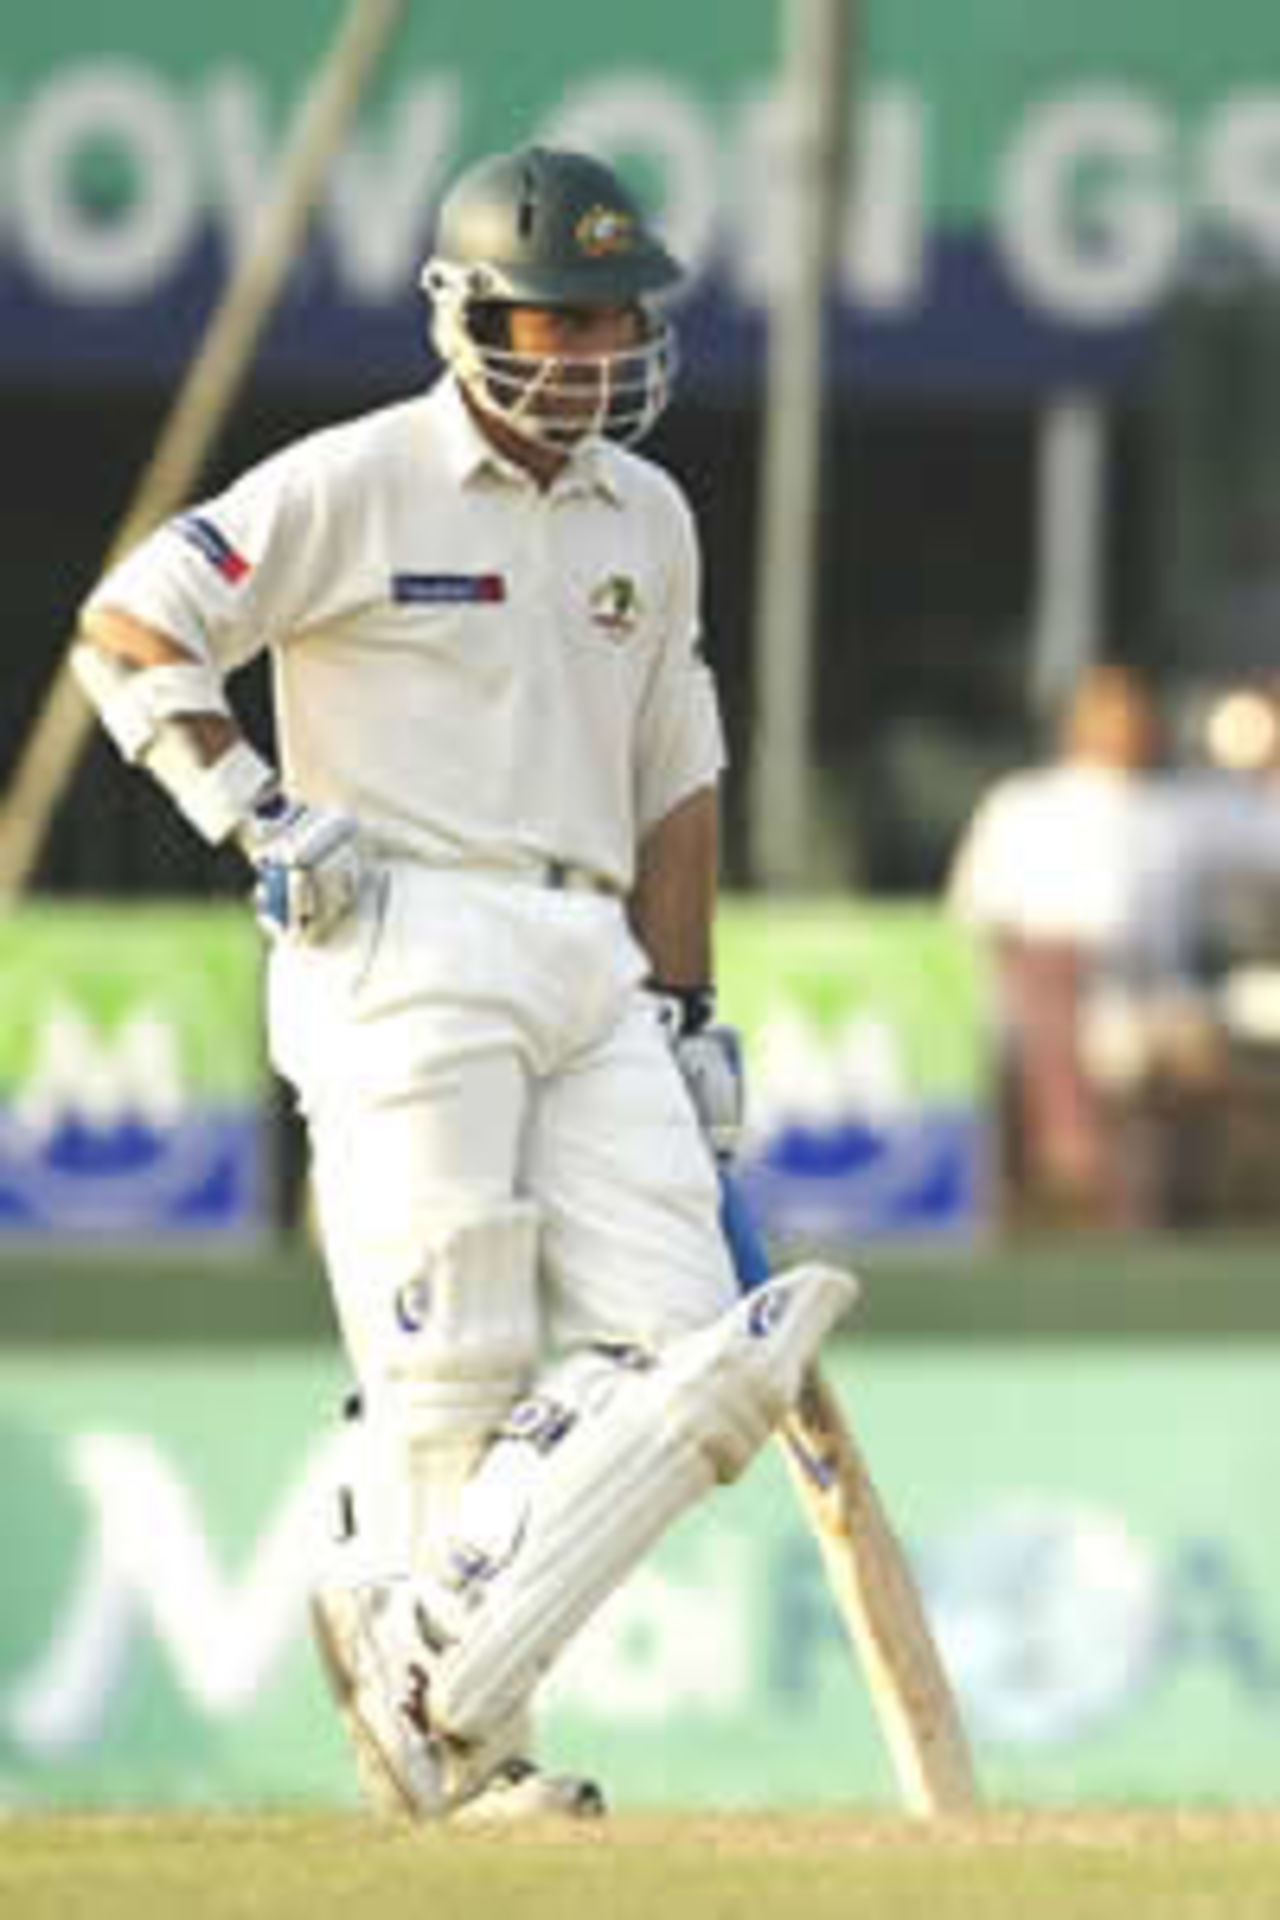 Australia's hopes of victory rest on Justin Langer, who fiinished 29 not out on day 3 in Colombo